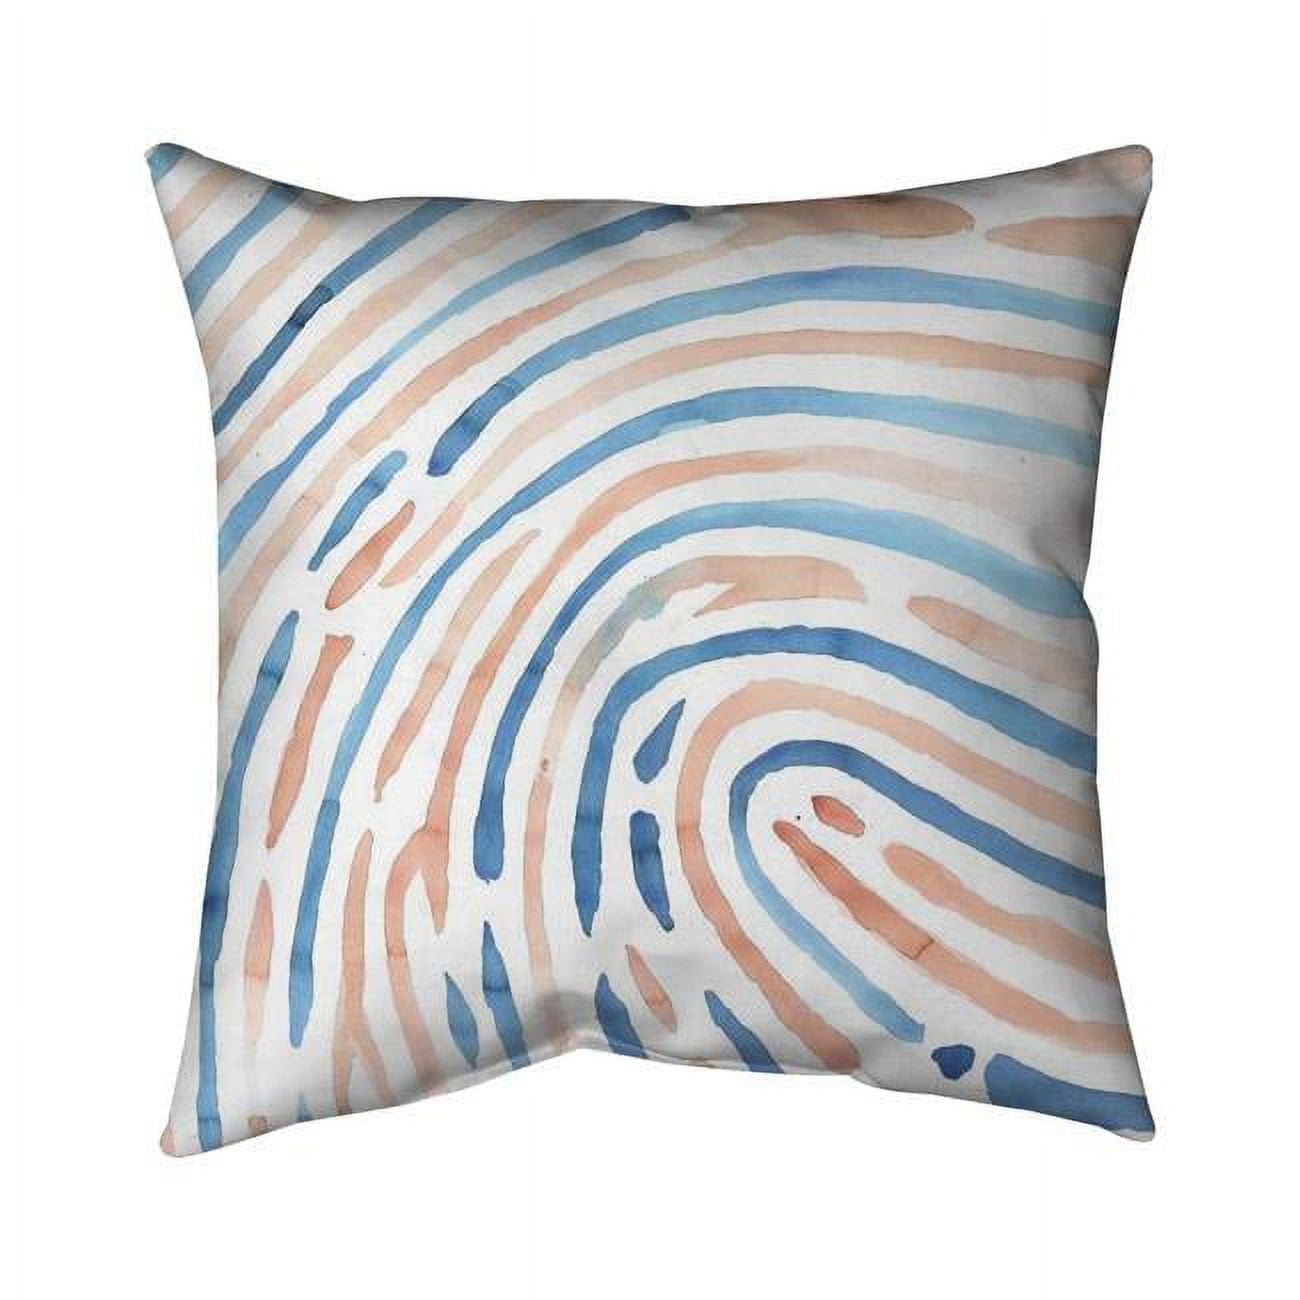 Fondo 20 x 20 in. Footprint-Double Sided Print Outdoor Pillow Cover